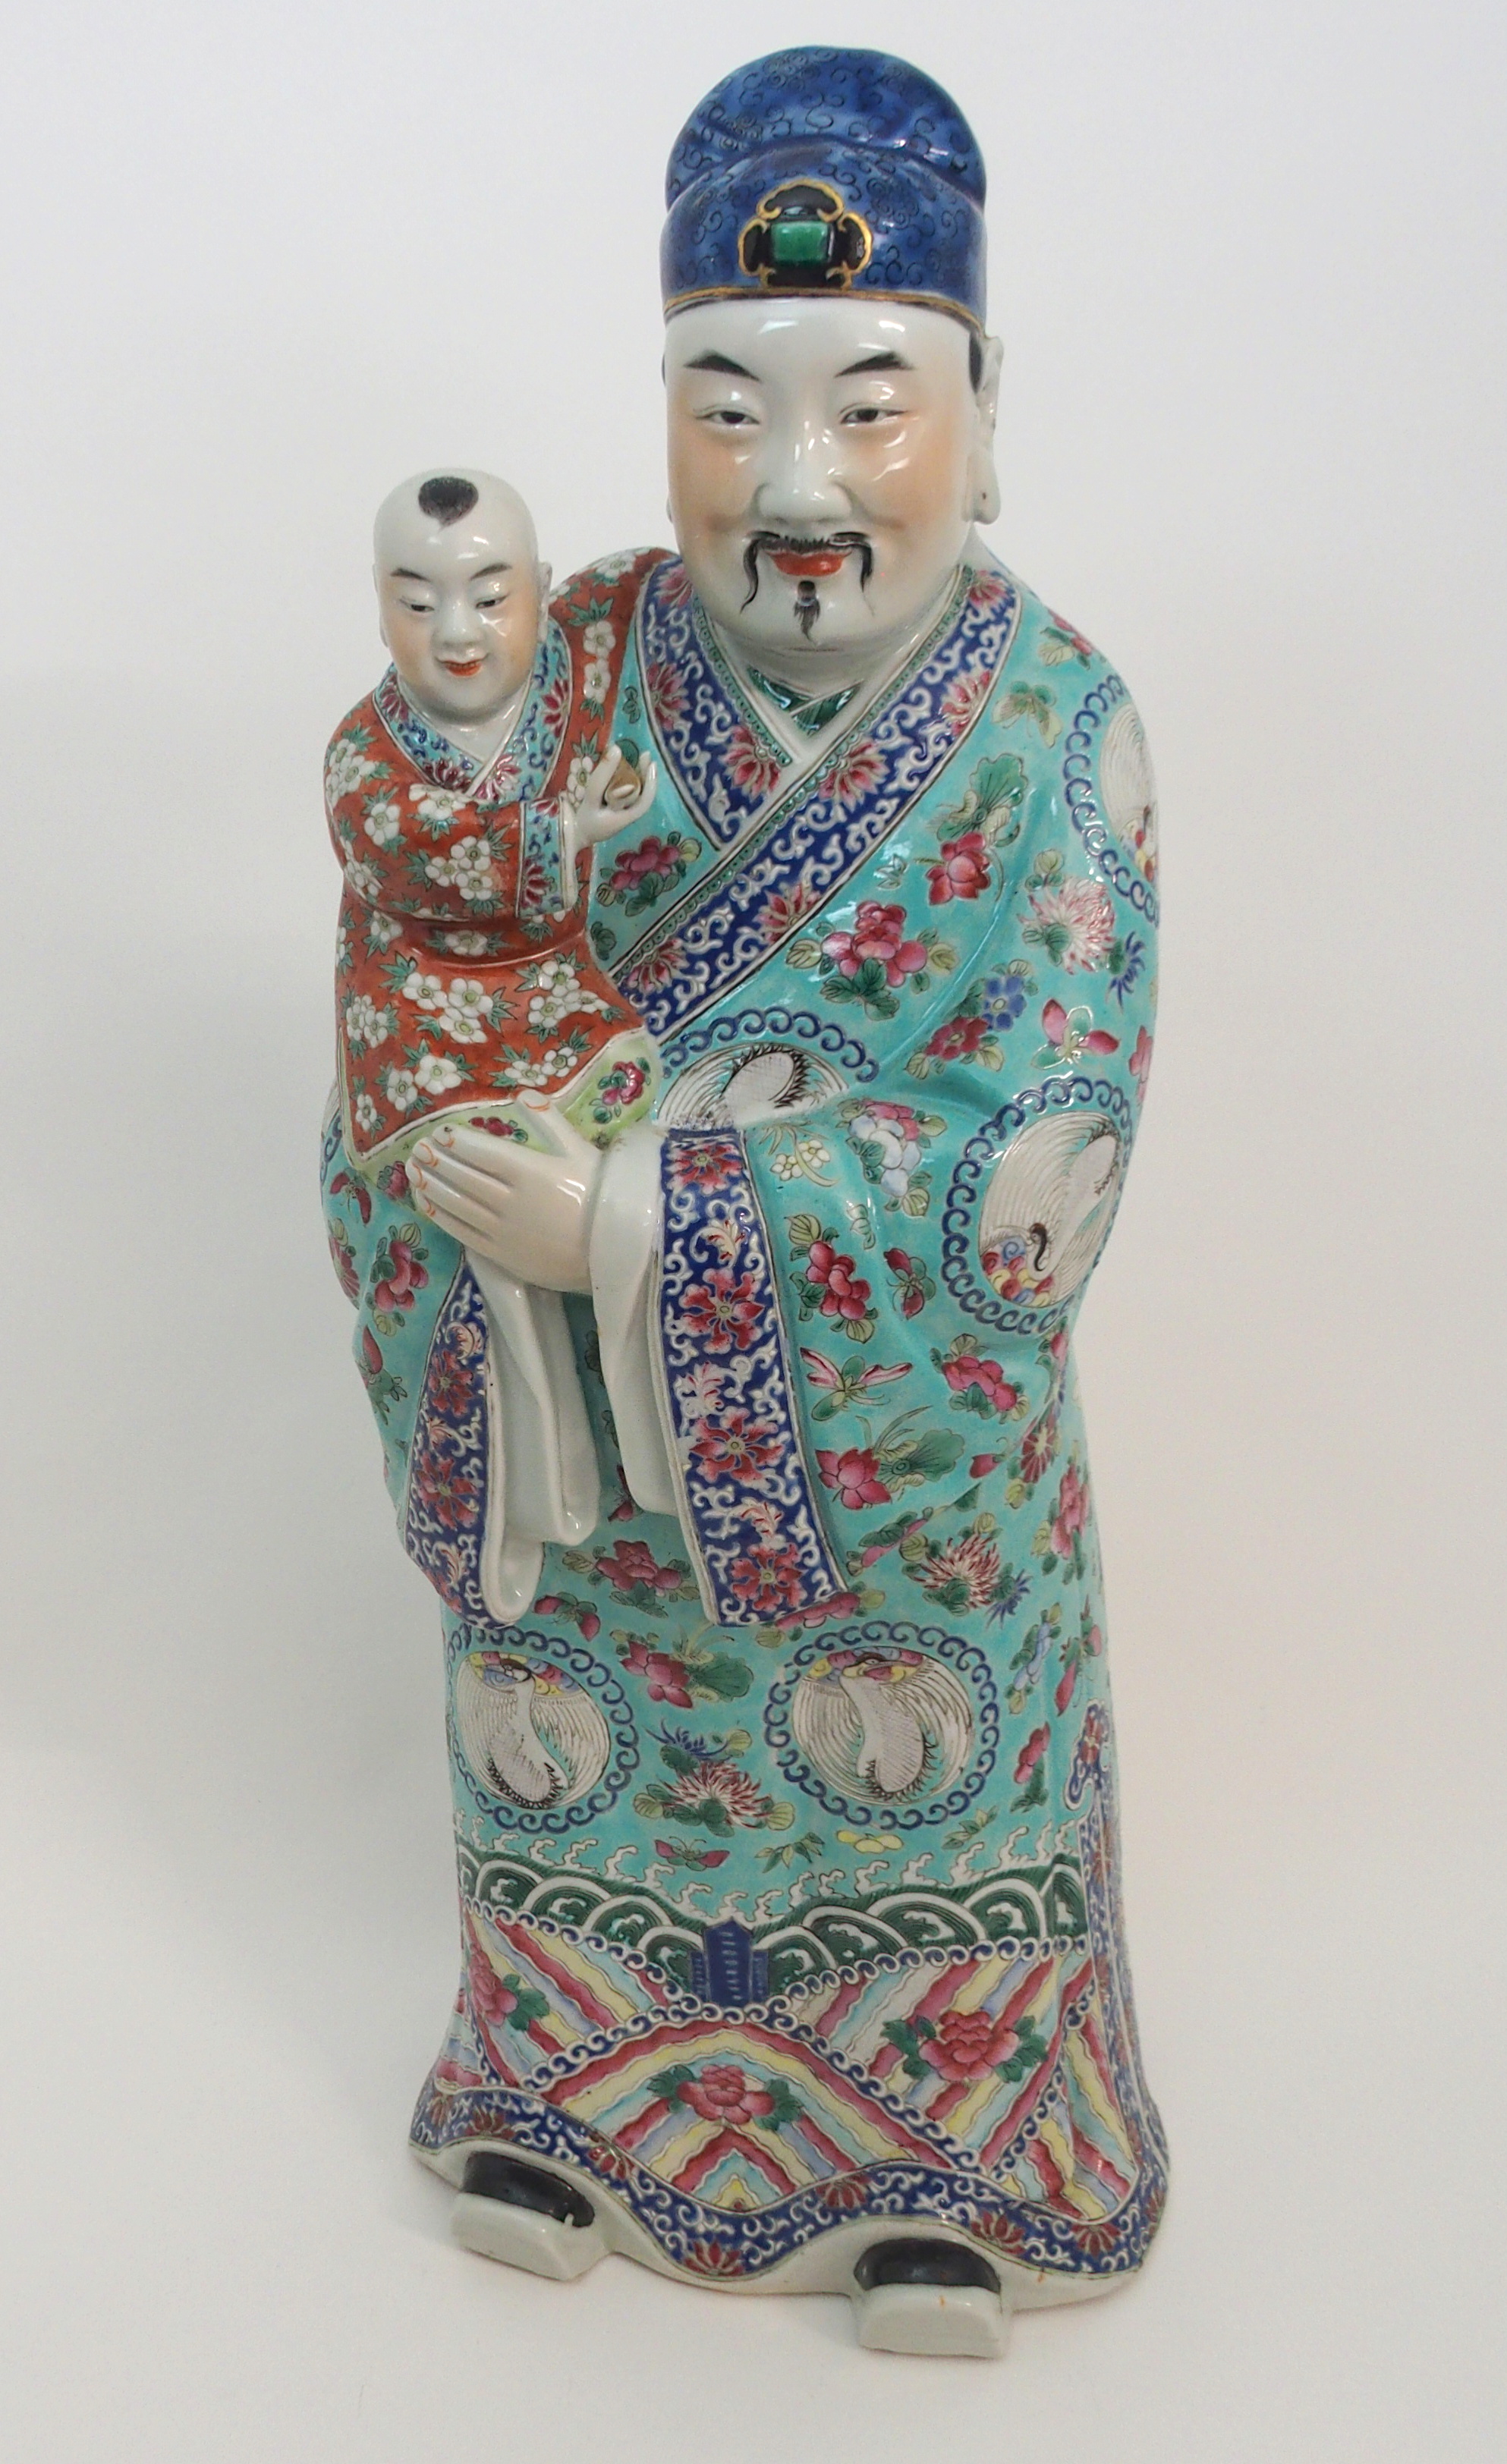 A CANTON FIGURE OF AN OFFICIAL HOLDING A CHILD standing and wearing kimono set with crane roundels